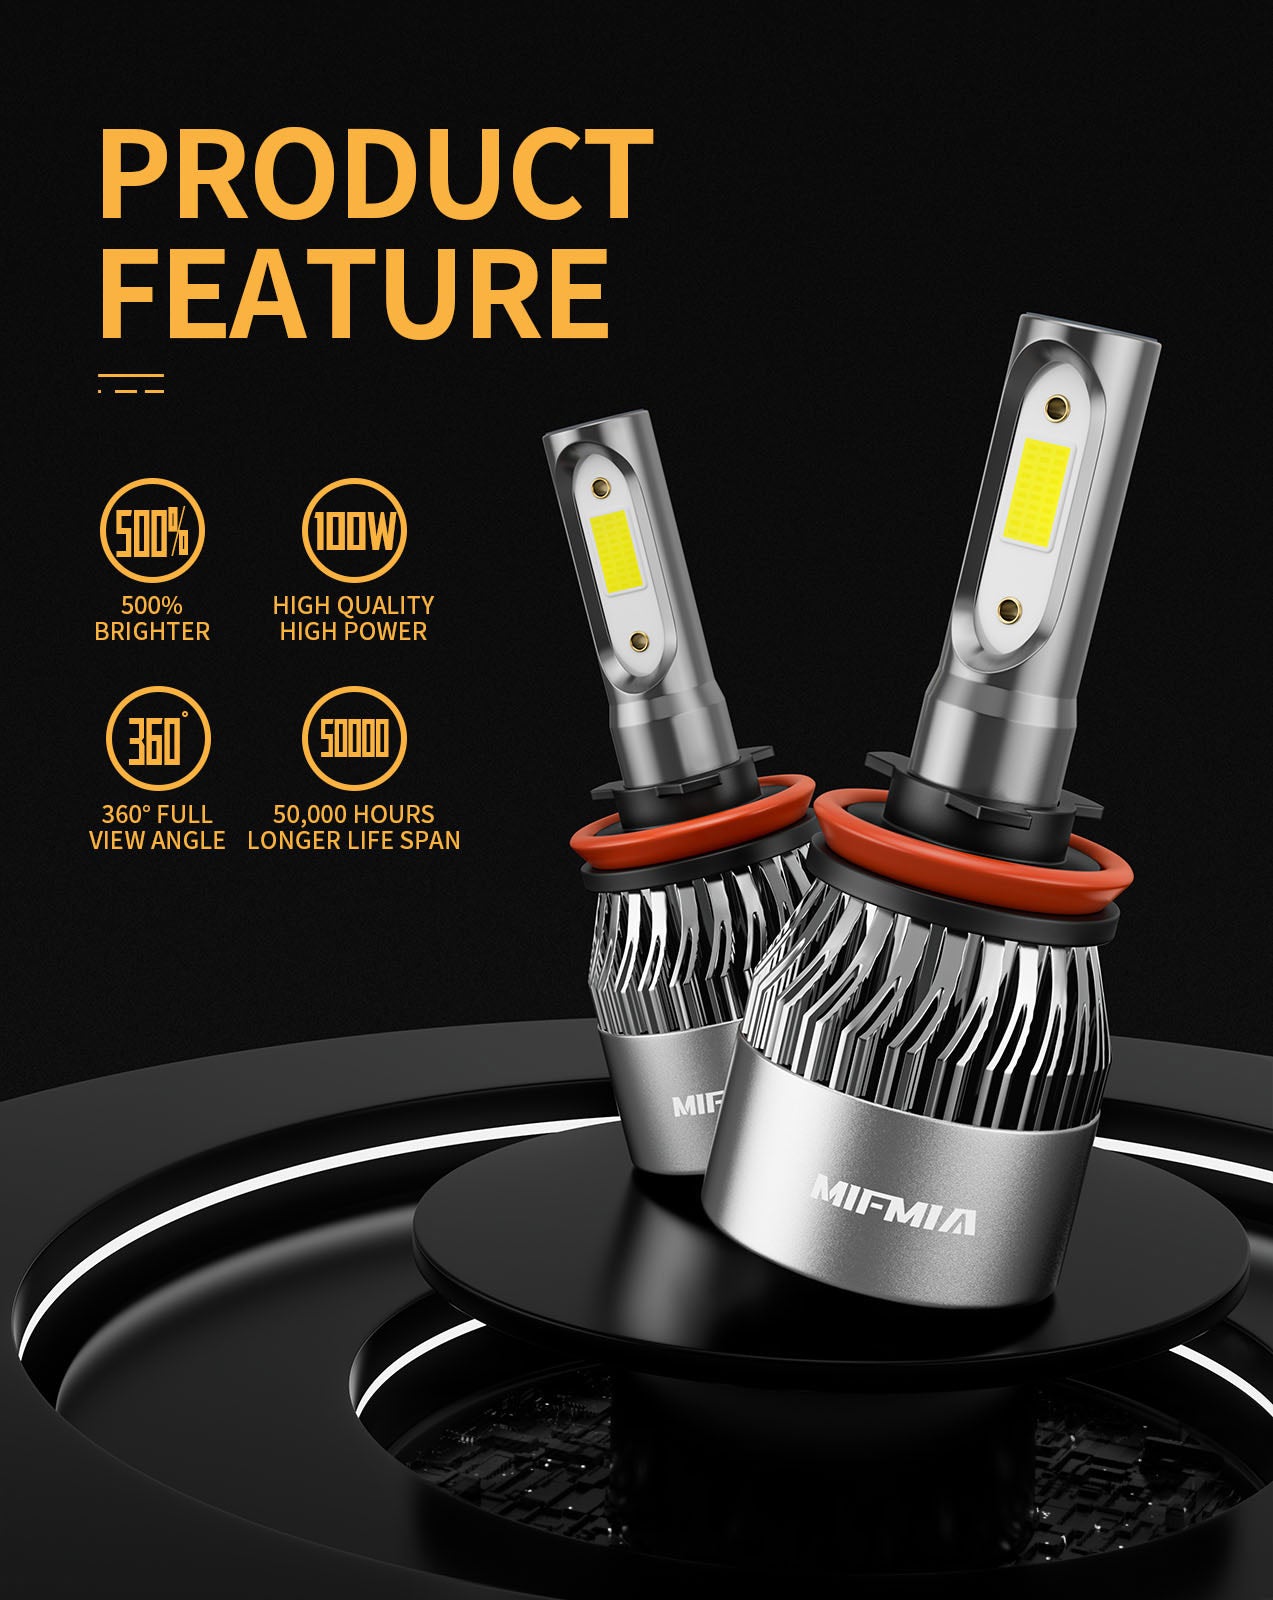 MIFMIA H8 H9 H11 LED Headlight Bulbs, 100W 15000 Lumens 500% Brighter 6500K  Cool White LED Headlights Conversion Kit Halogen Replacement